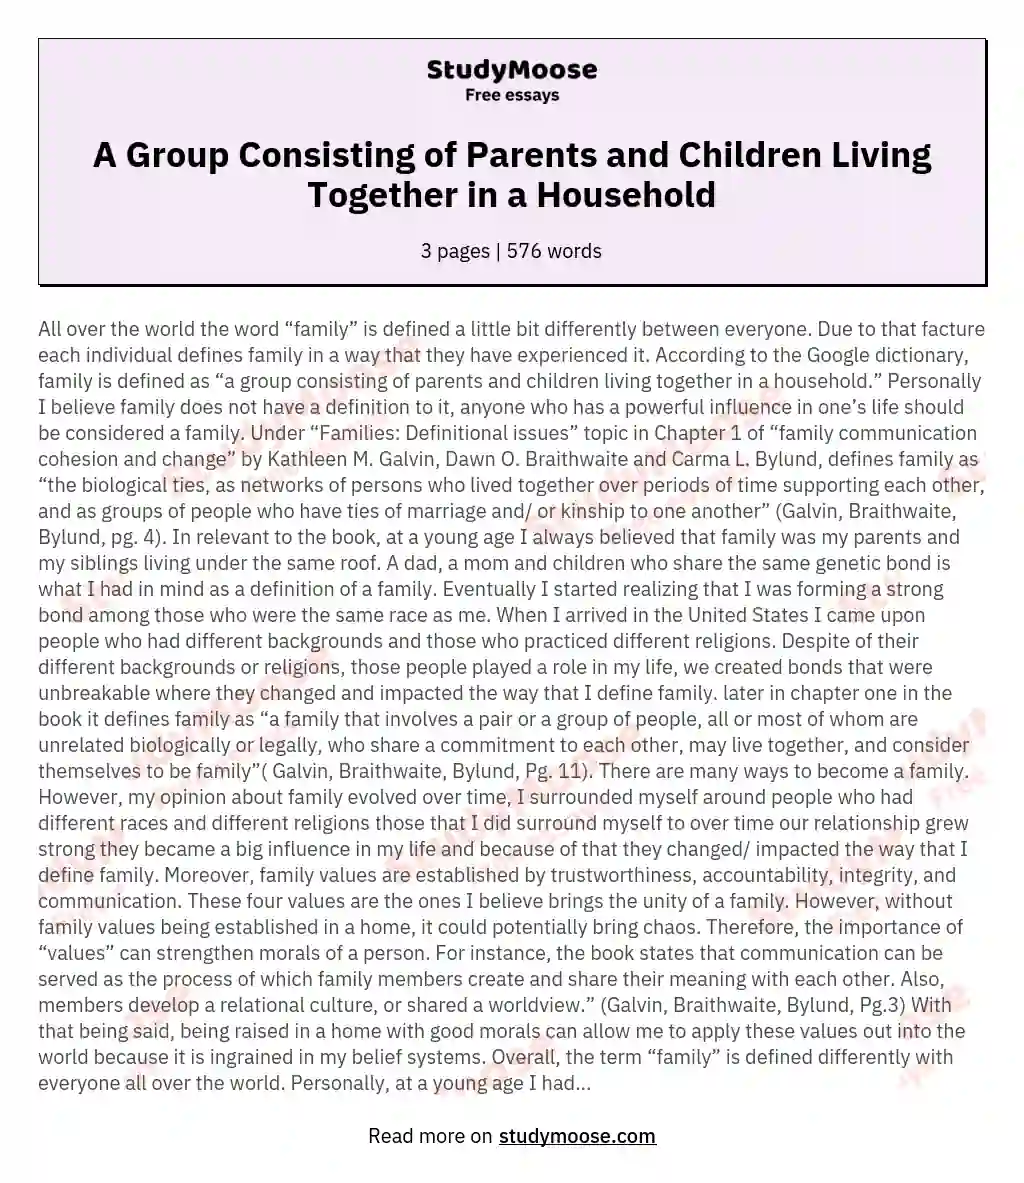 A Group Consisting of Parents and Children Living Together in a Household essay